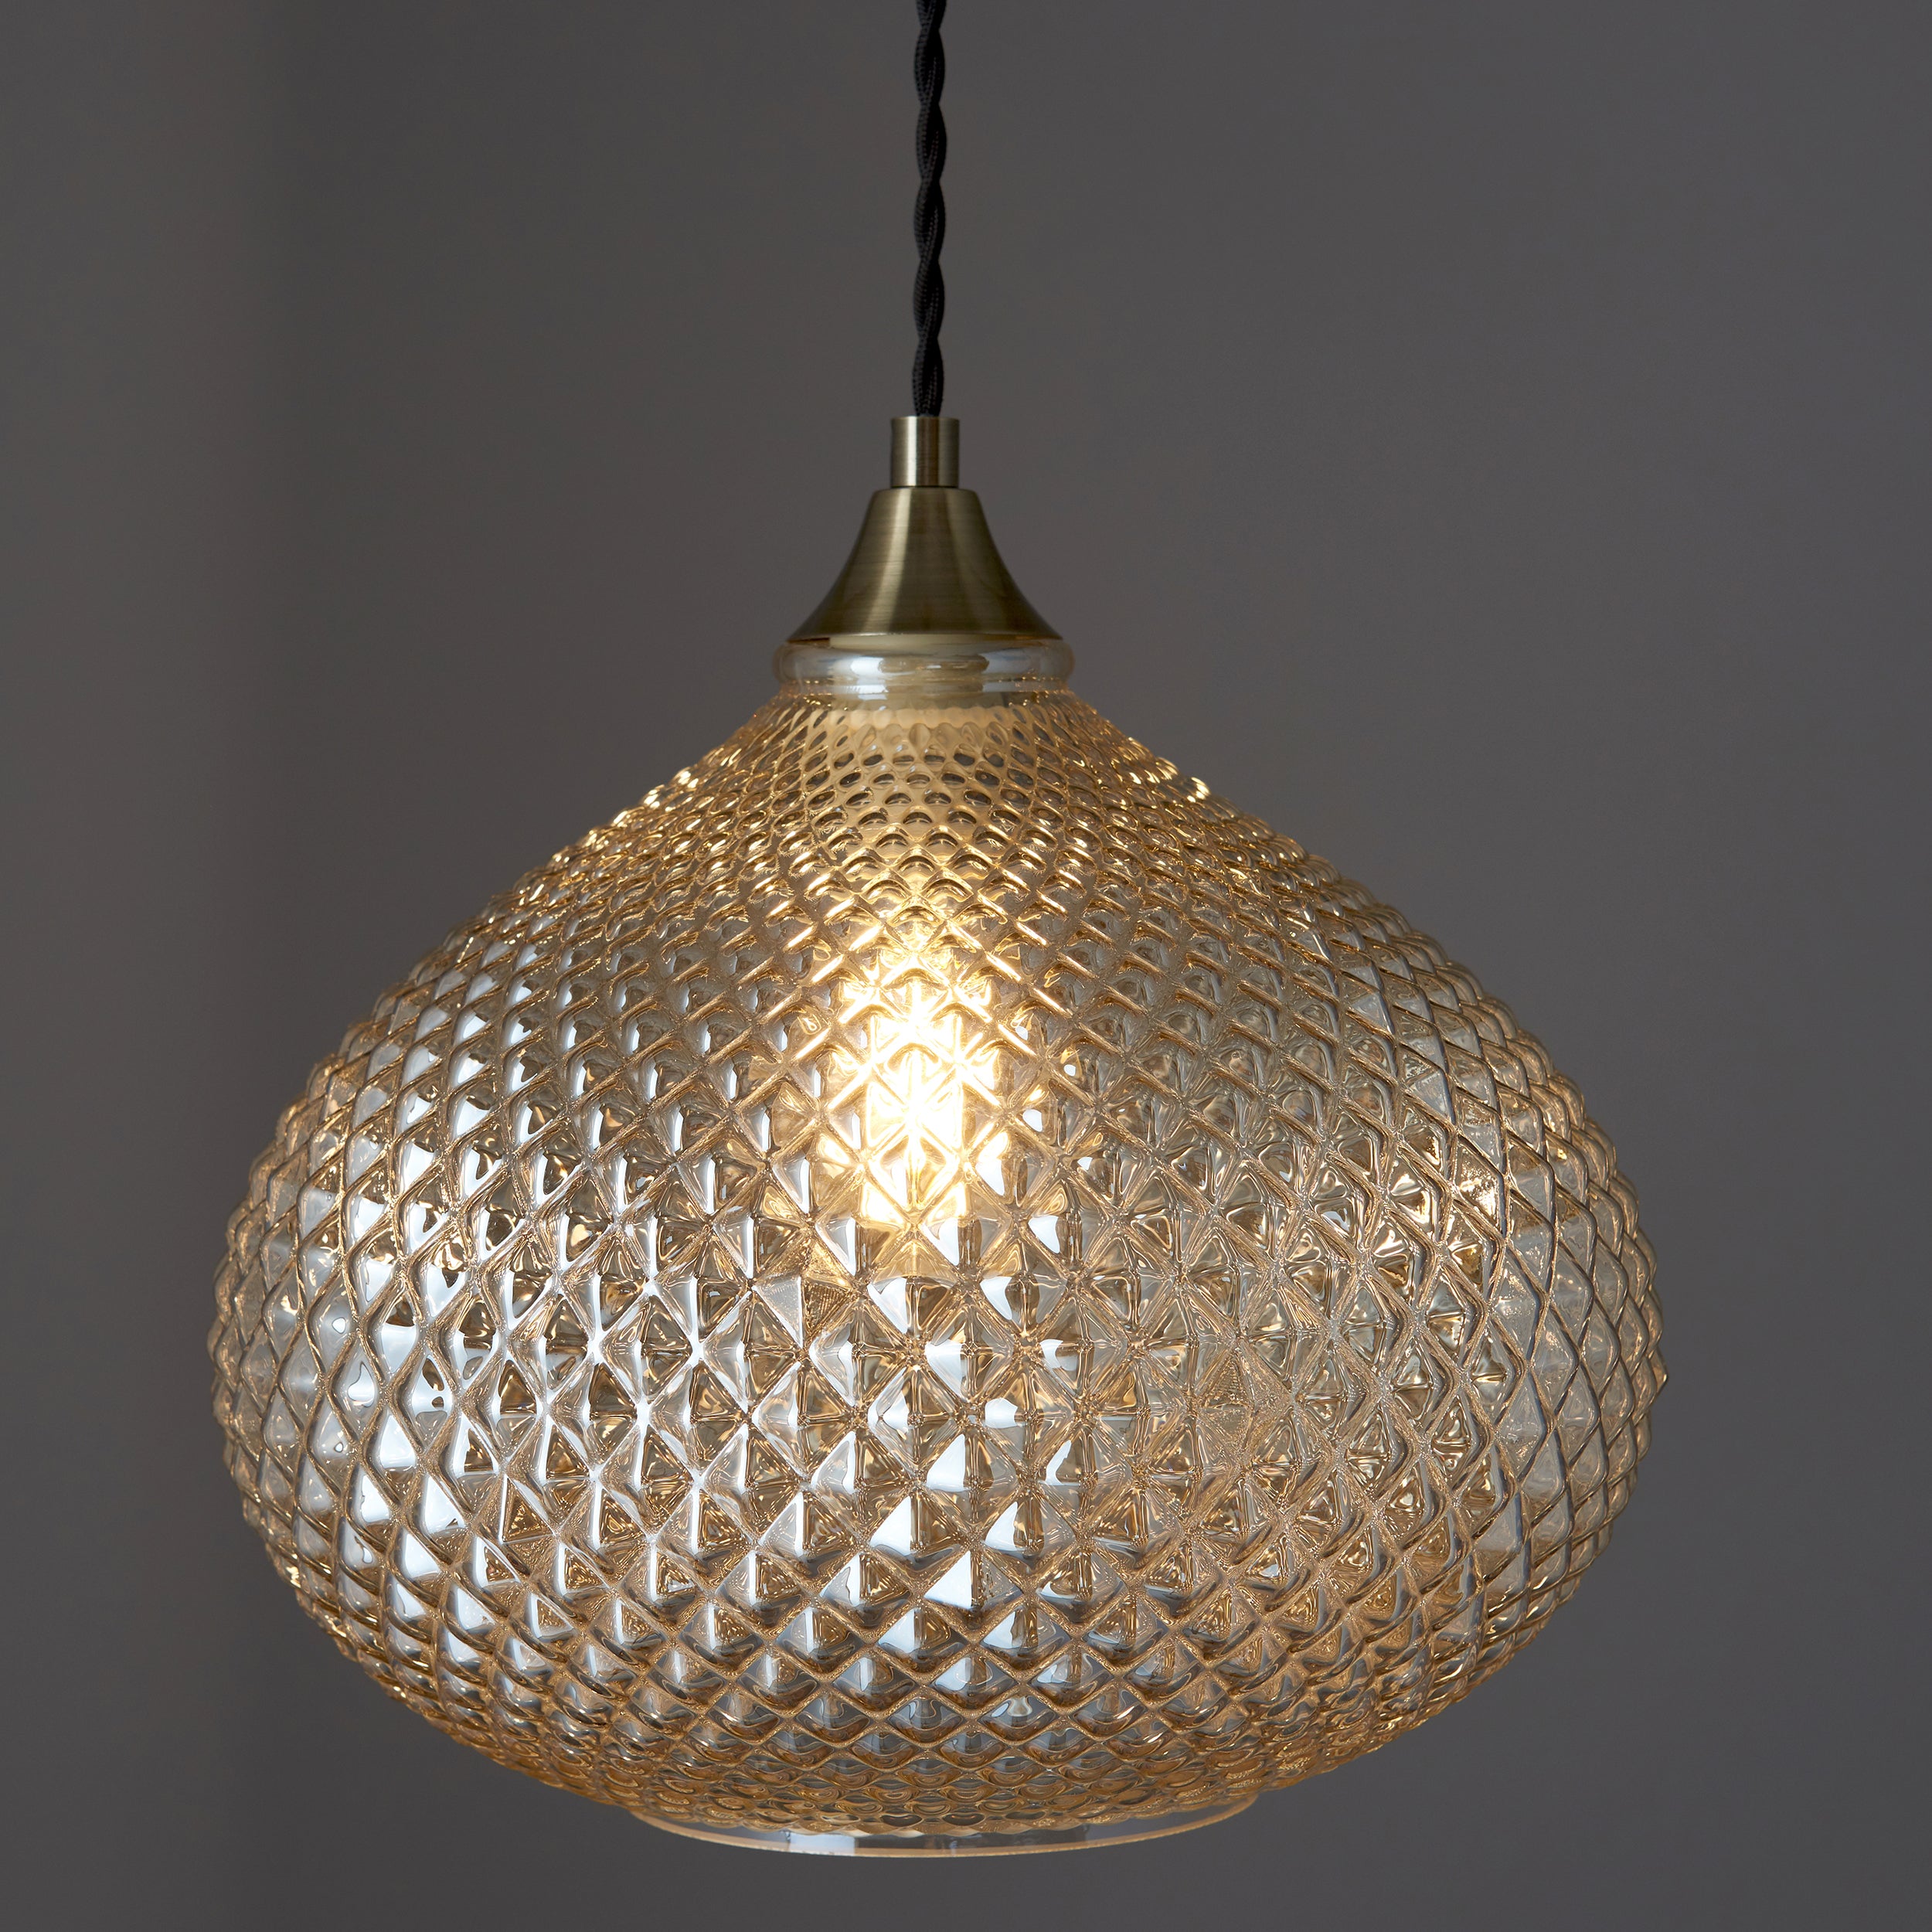 Livia Pendant Light In Antique Brass And Champagne Glass